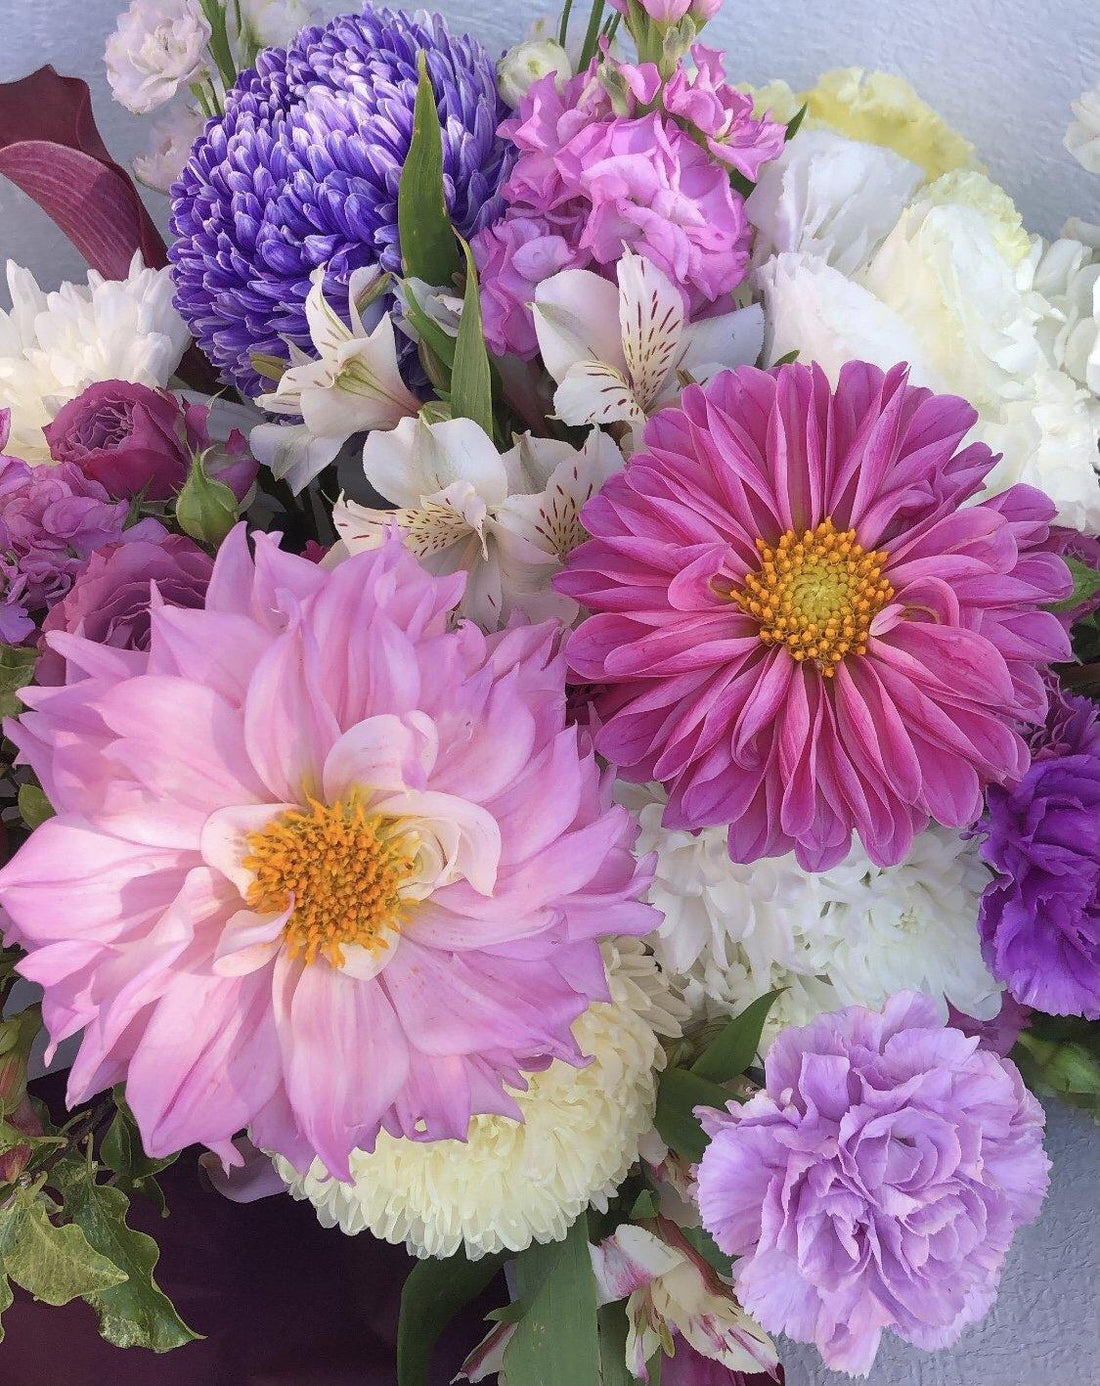 The Best Mother's Day Gifts for your Mum for 2021 - Flowers Gold Coast